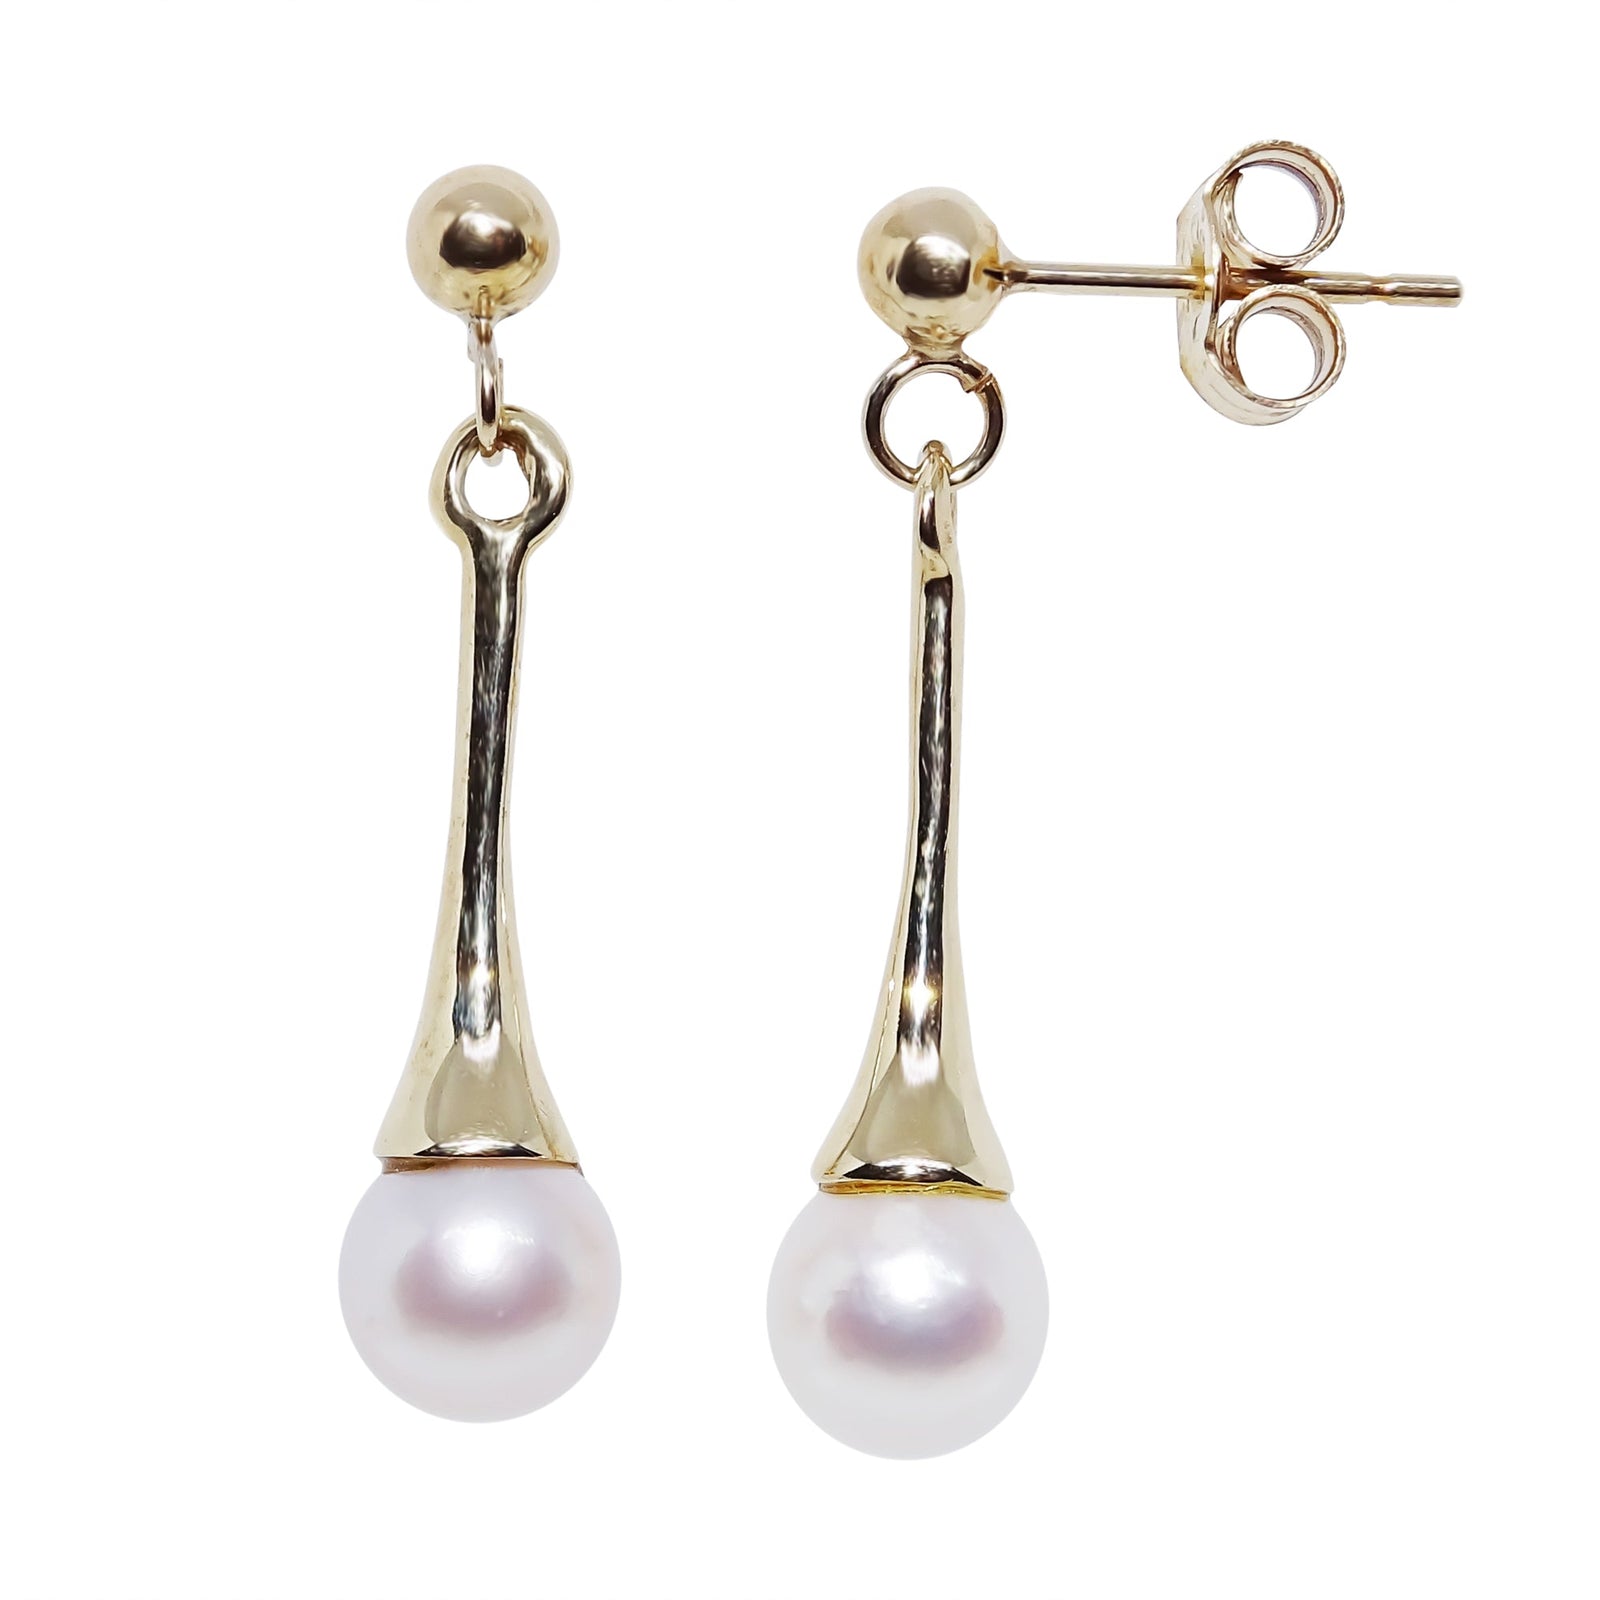 9ct gold 6mm cultured pearl drop earrings